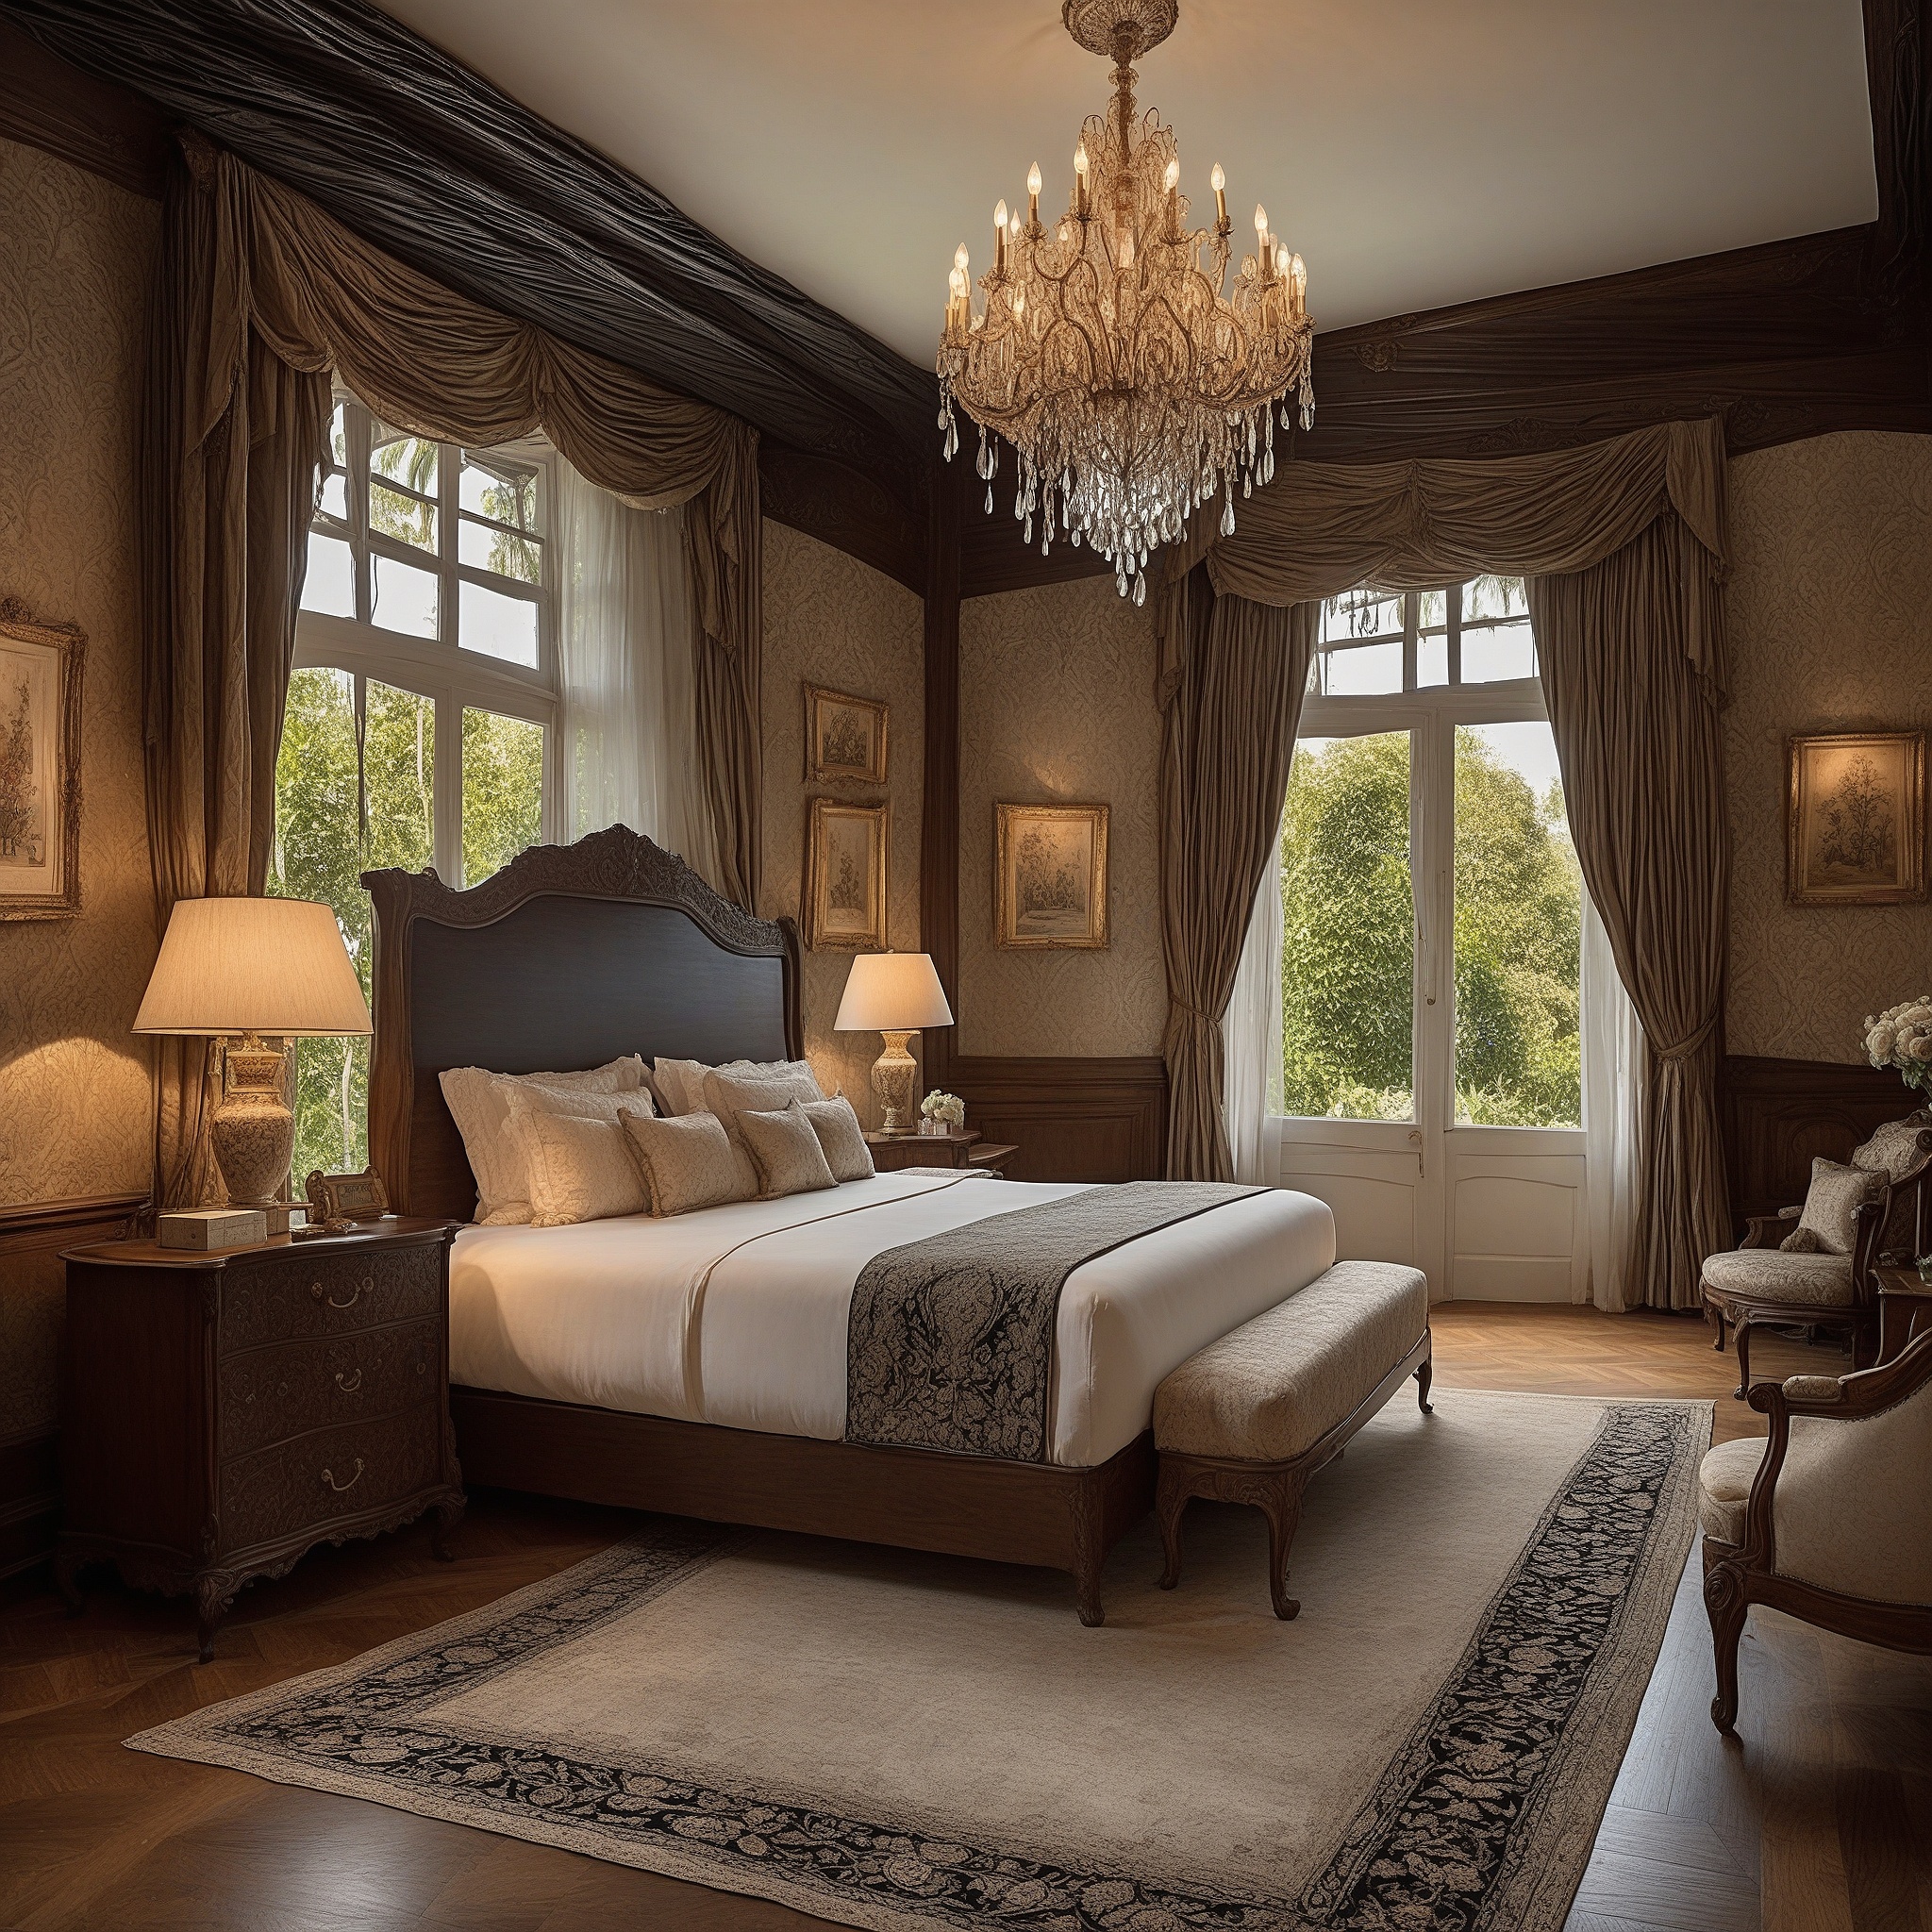 Traditional Master bedroom With Wood Ornate Furniture, Wallpaper and Chandelier